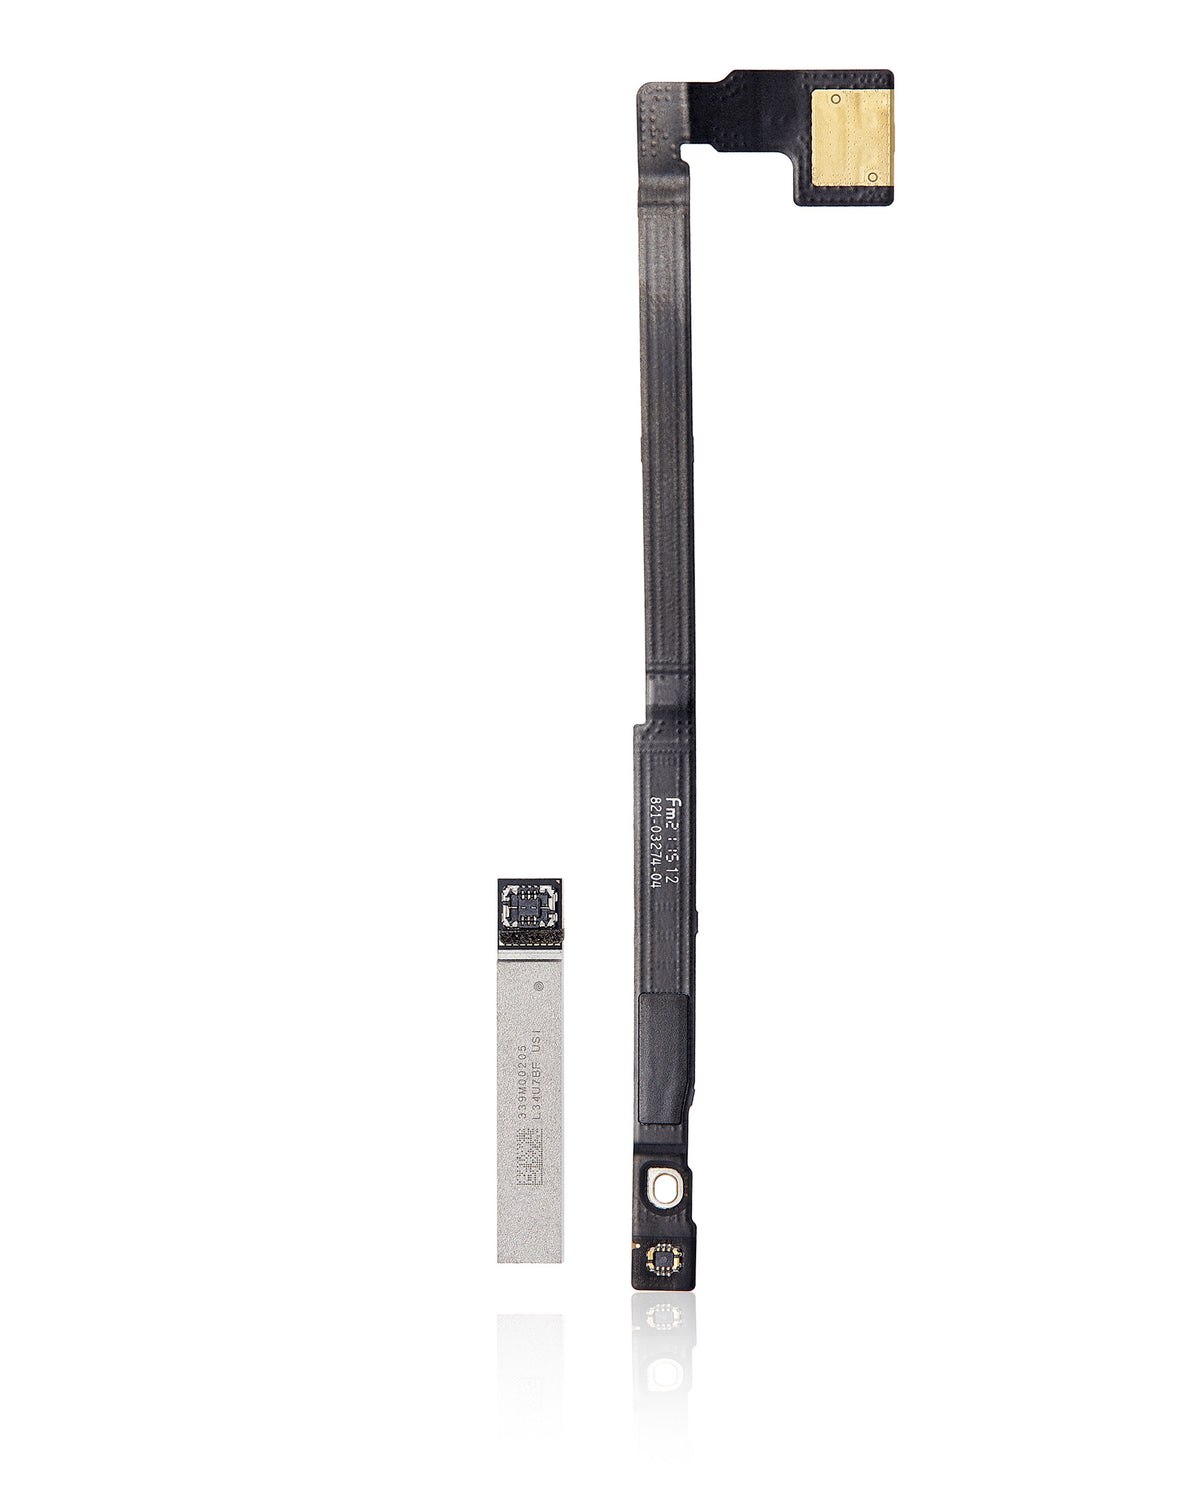 5G MODULE WITH UW ANTENNA FLEX CABLE FOR IPHONE 13 PRO